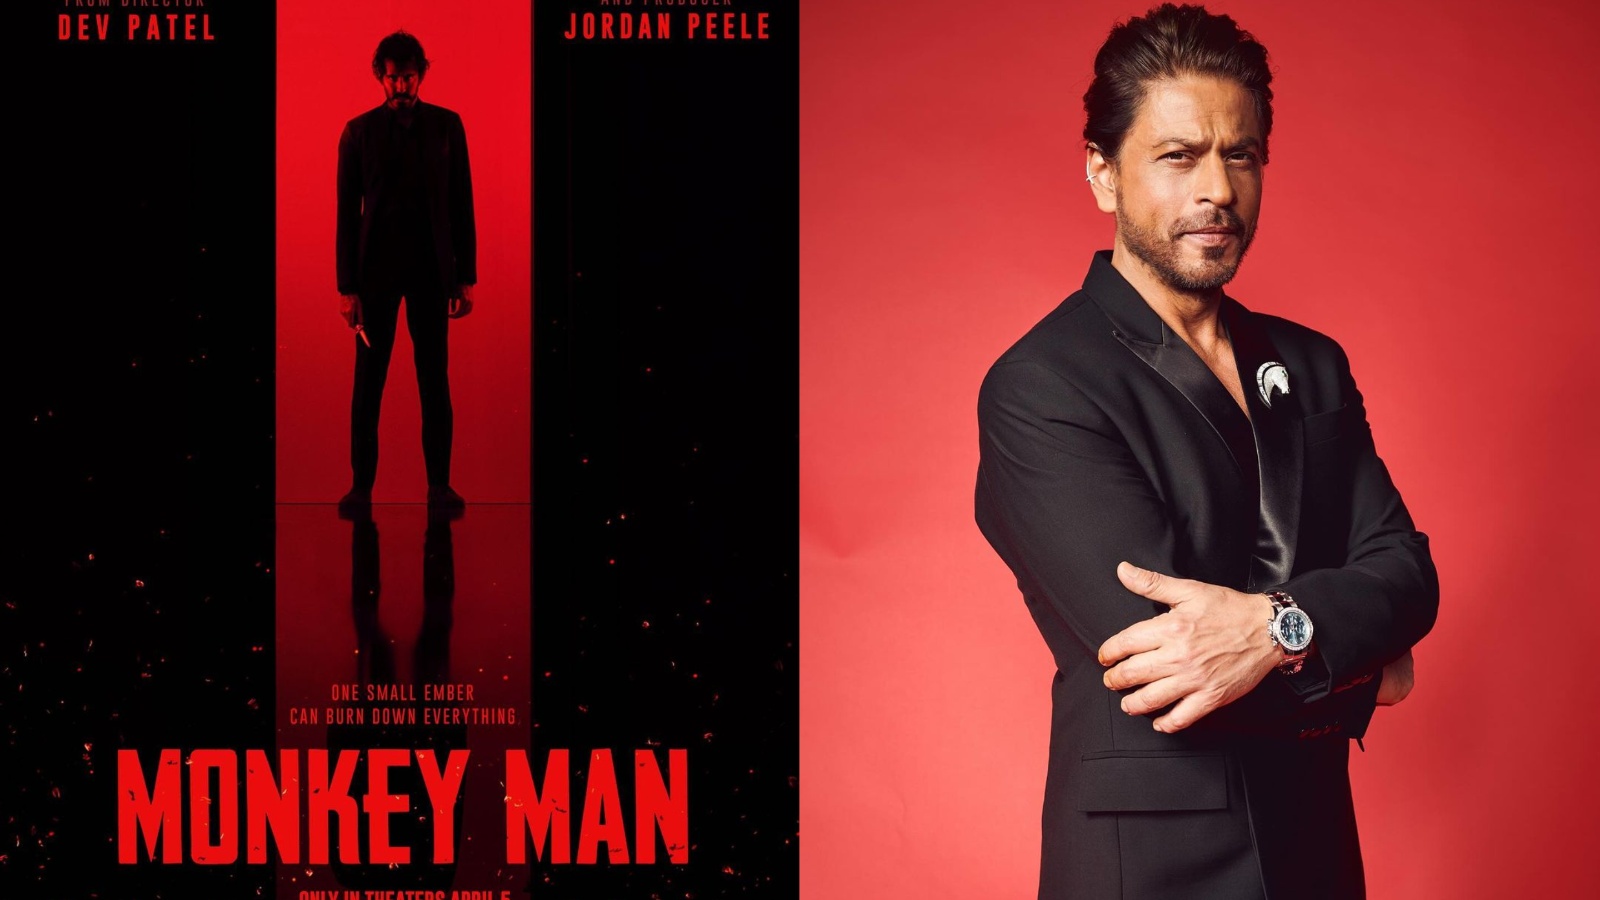 android, ‘anything shah rukh khan does’: dev patel reveals inspiration for monkey man, says he learnt ‘importance of stillness’ from irrfan khan